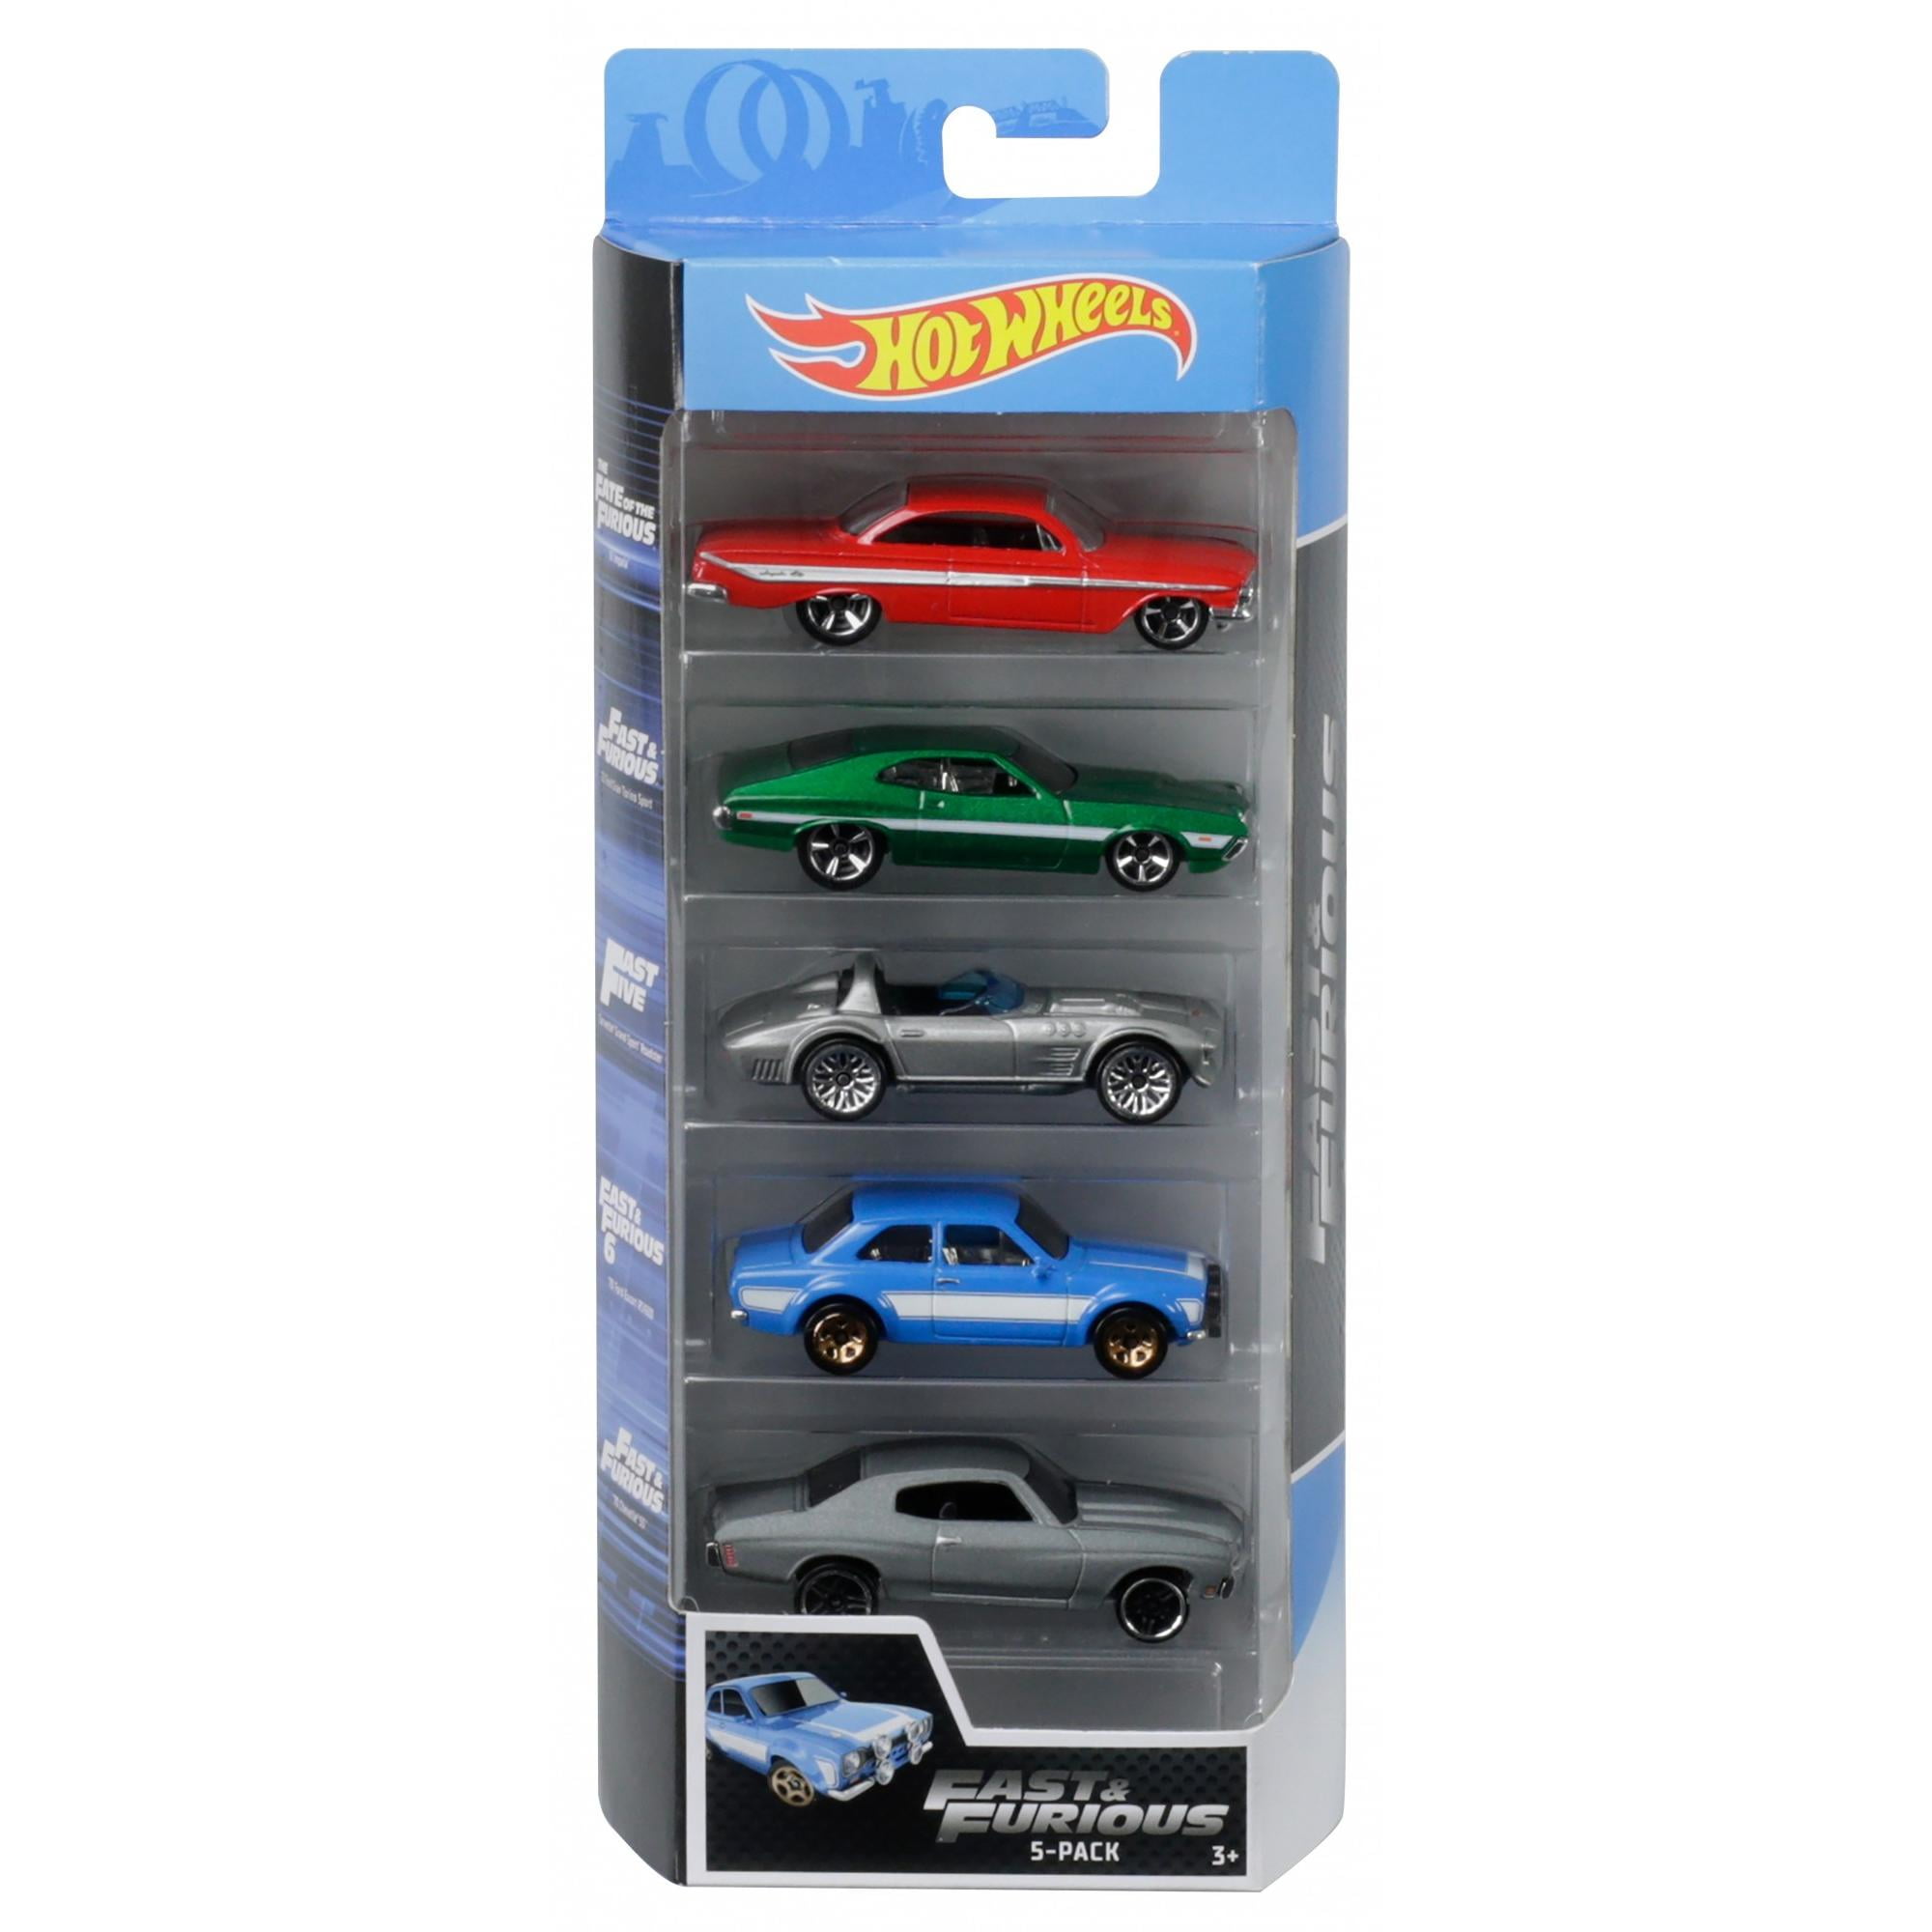 2021 Hot Wheels Fast & Furious Complete Set Walmart Exclusive 